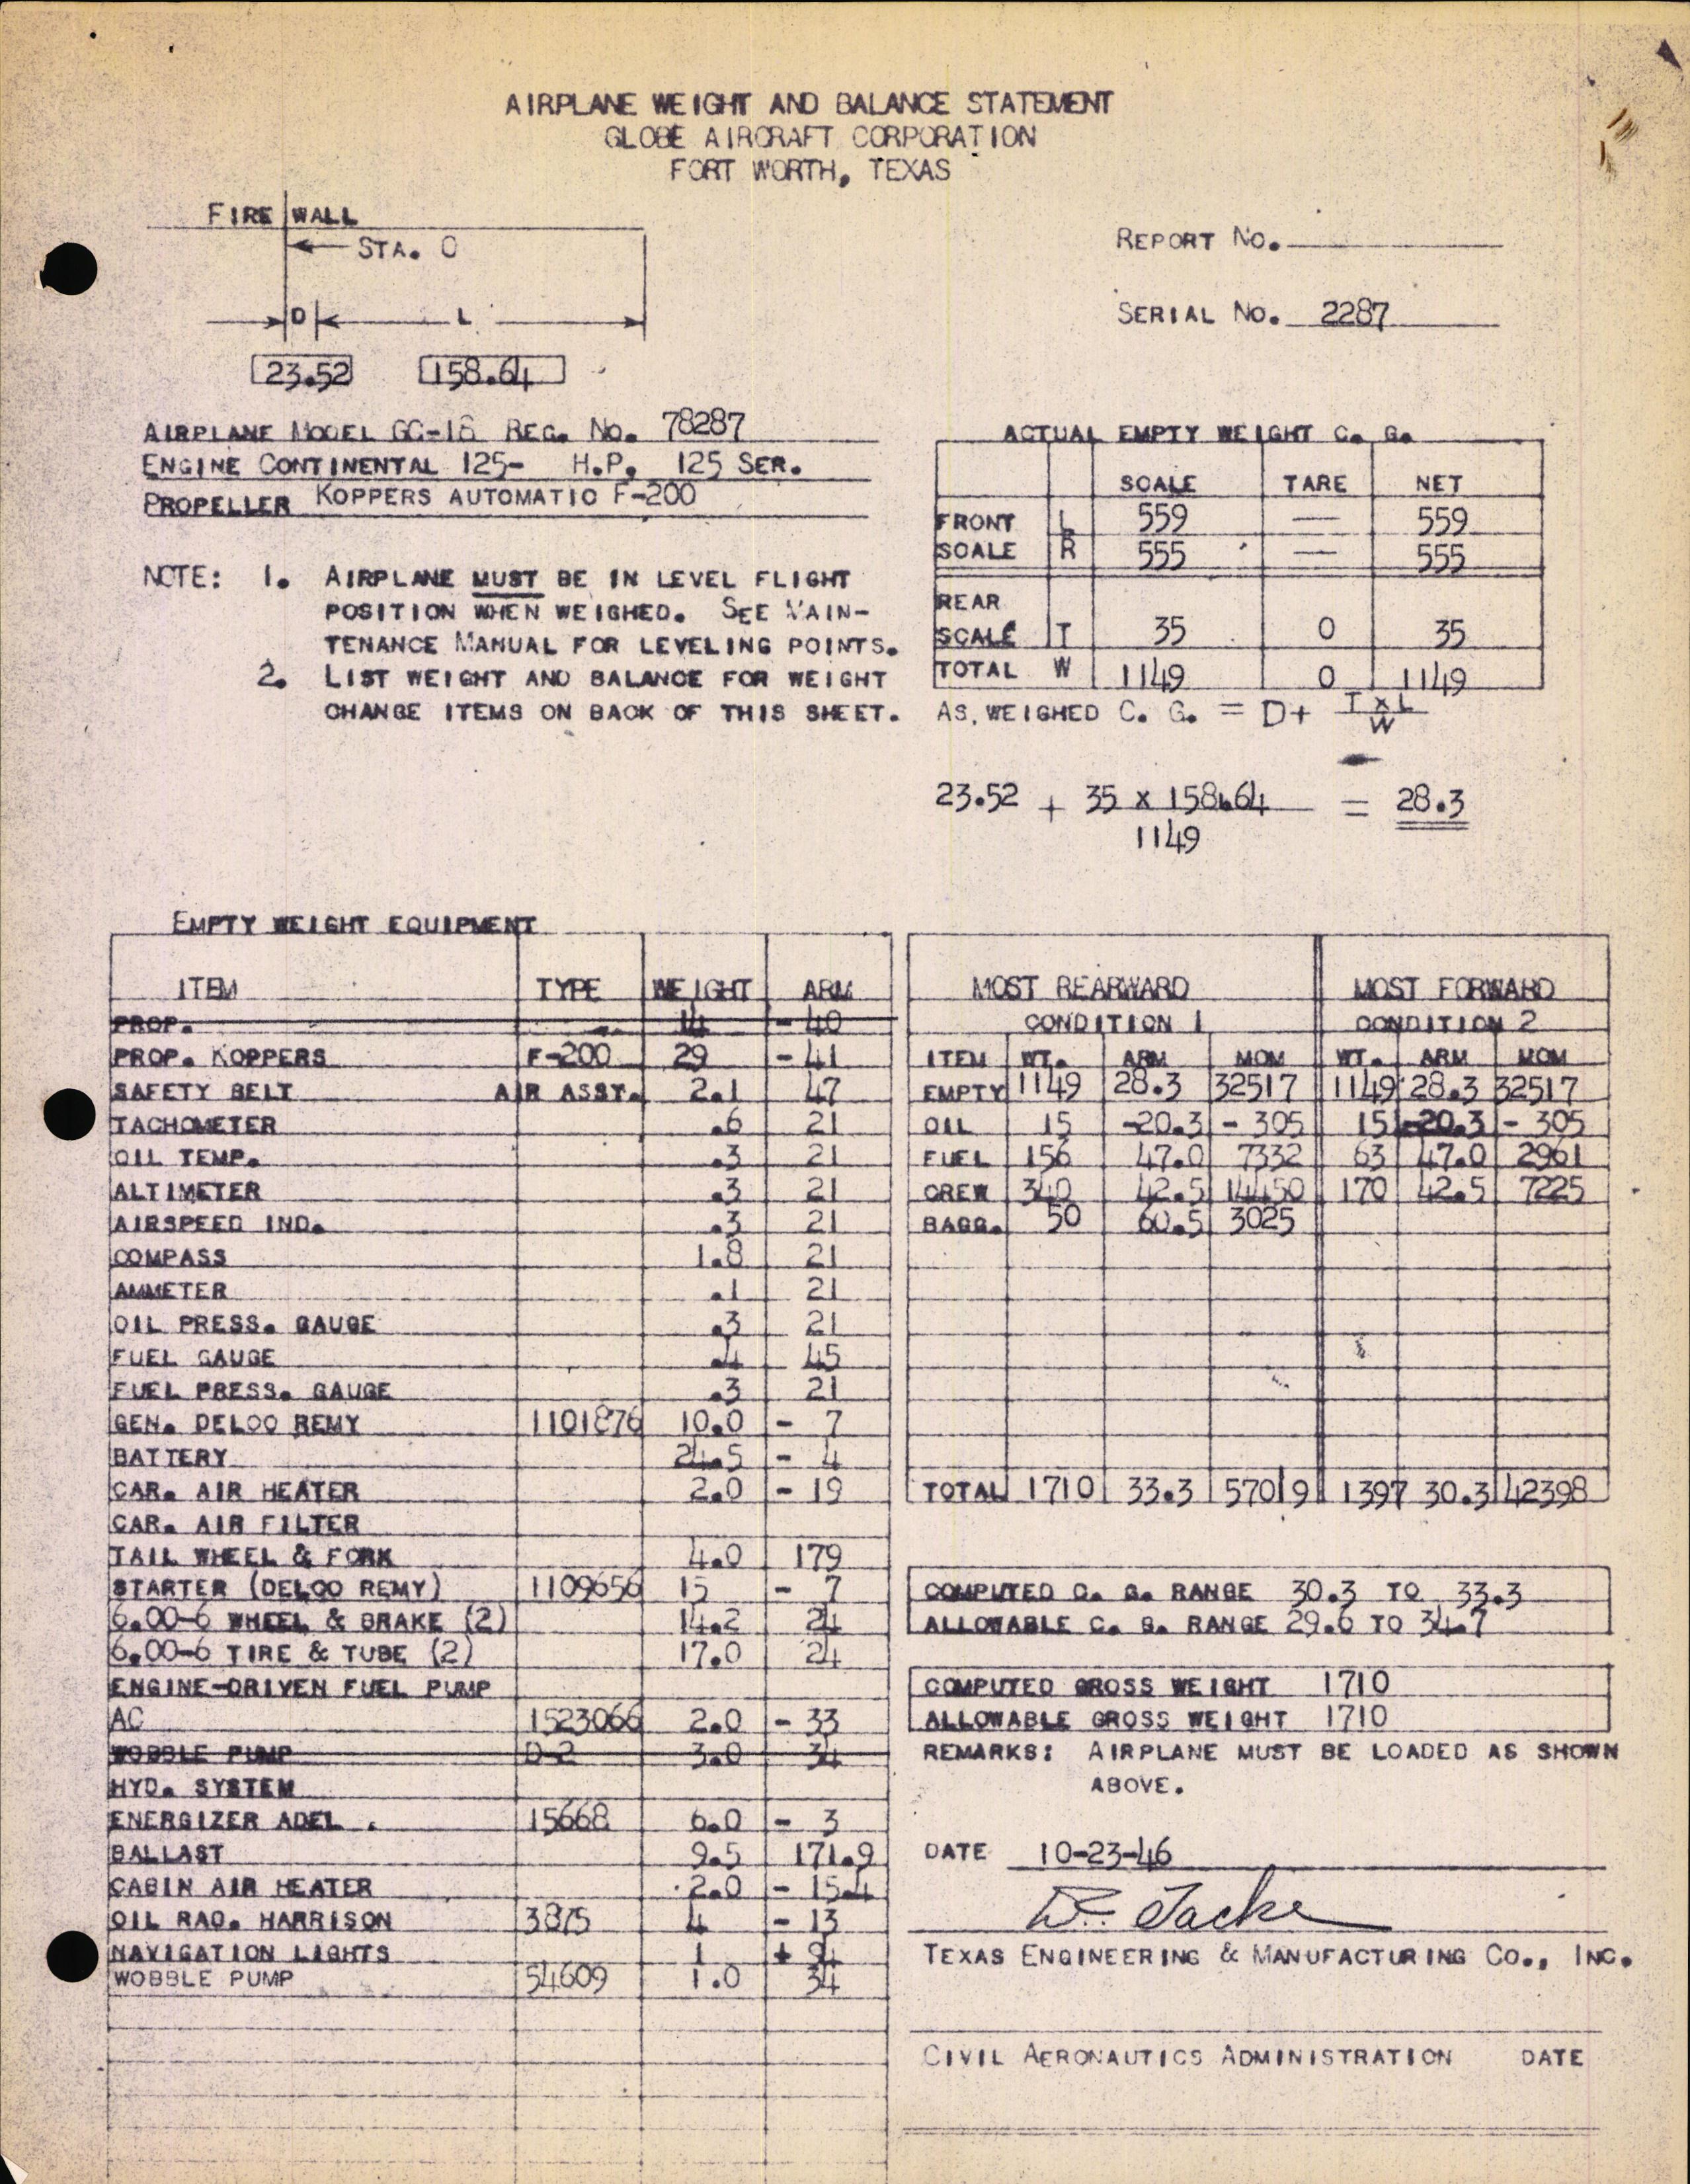 Sample page 2 from AirCorps Library document: Technical Information for Serial Number 2287